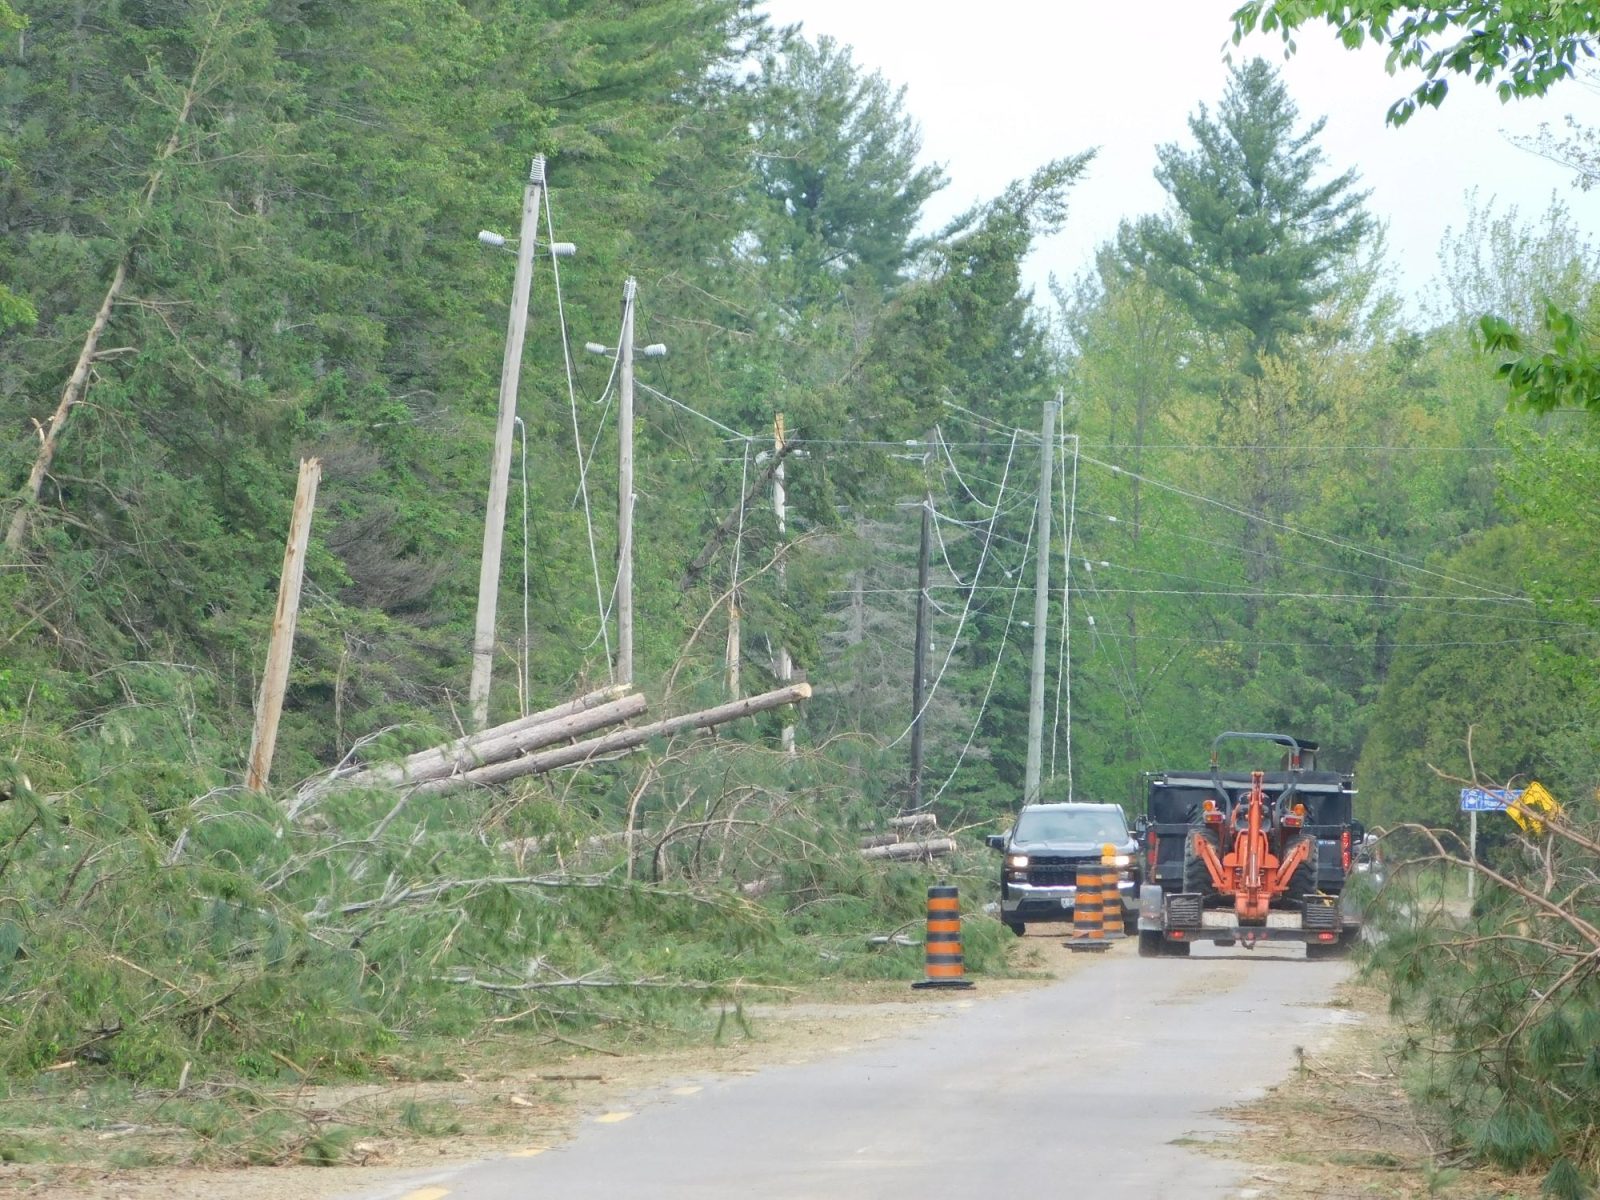 Province gives aid for windstorm cleanup